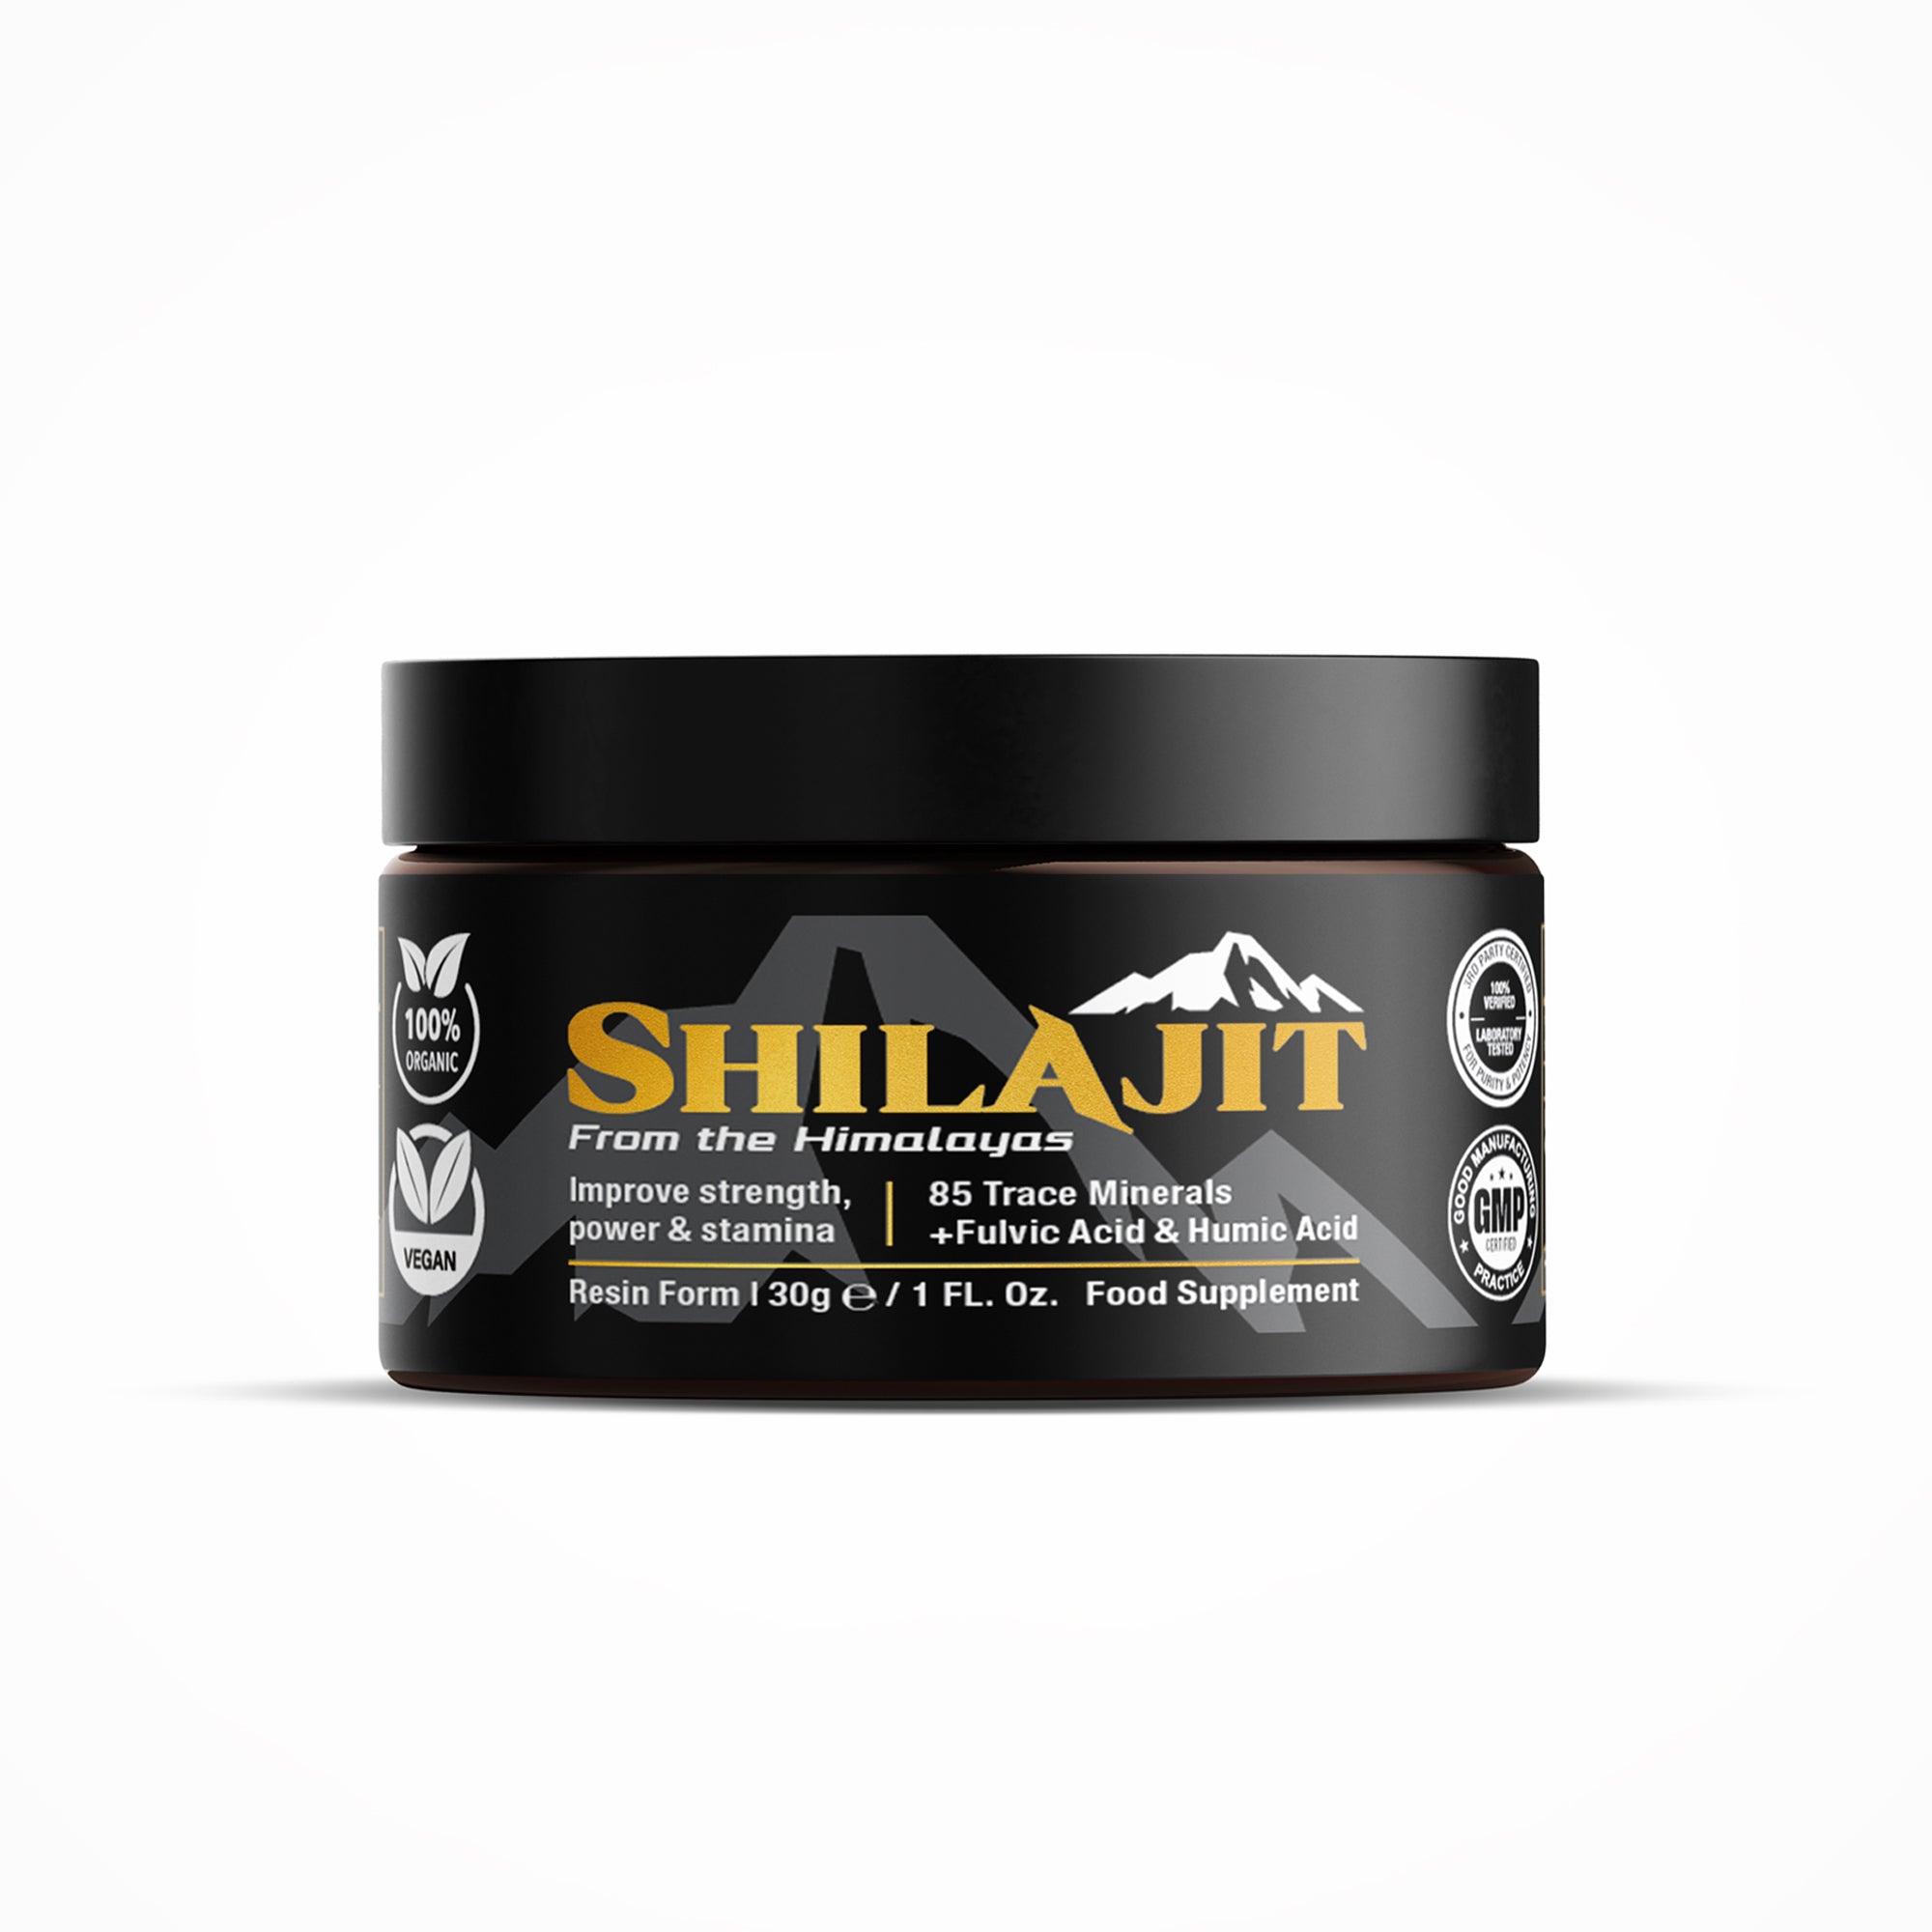 Shilajit - From the Himalayas - with 85 trace minerals - Improve strength, power & stamina